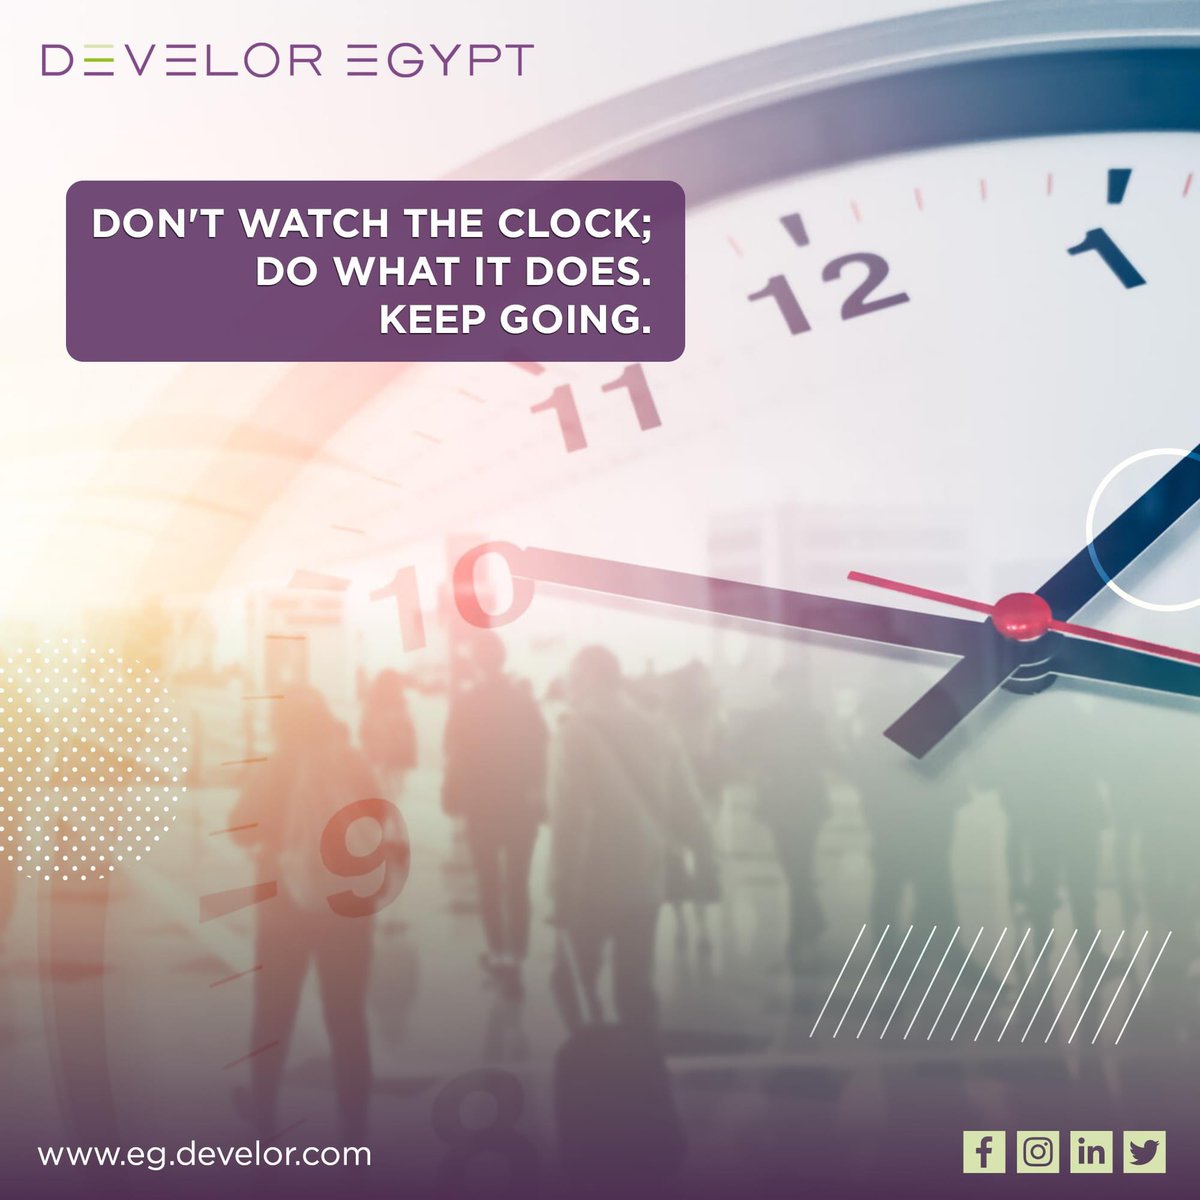 Let the clock remind you to keep going, pushing forward towards your goals and dreams.

#keepgoing #timemanagement #determination #persistence #perseverance #focusongoals #achievement #successmindset #inspiration #productivity #workethic #nevergiveup